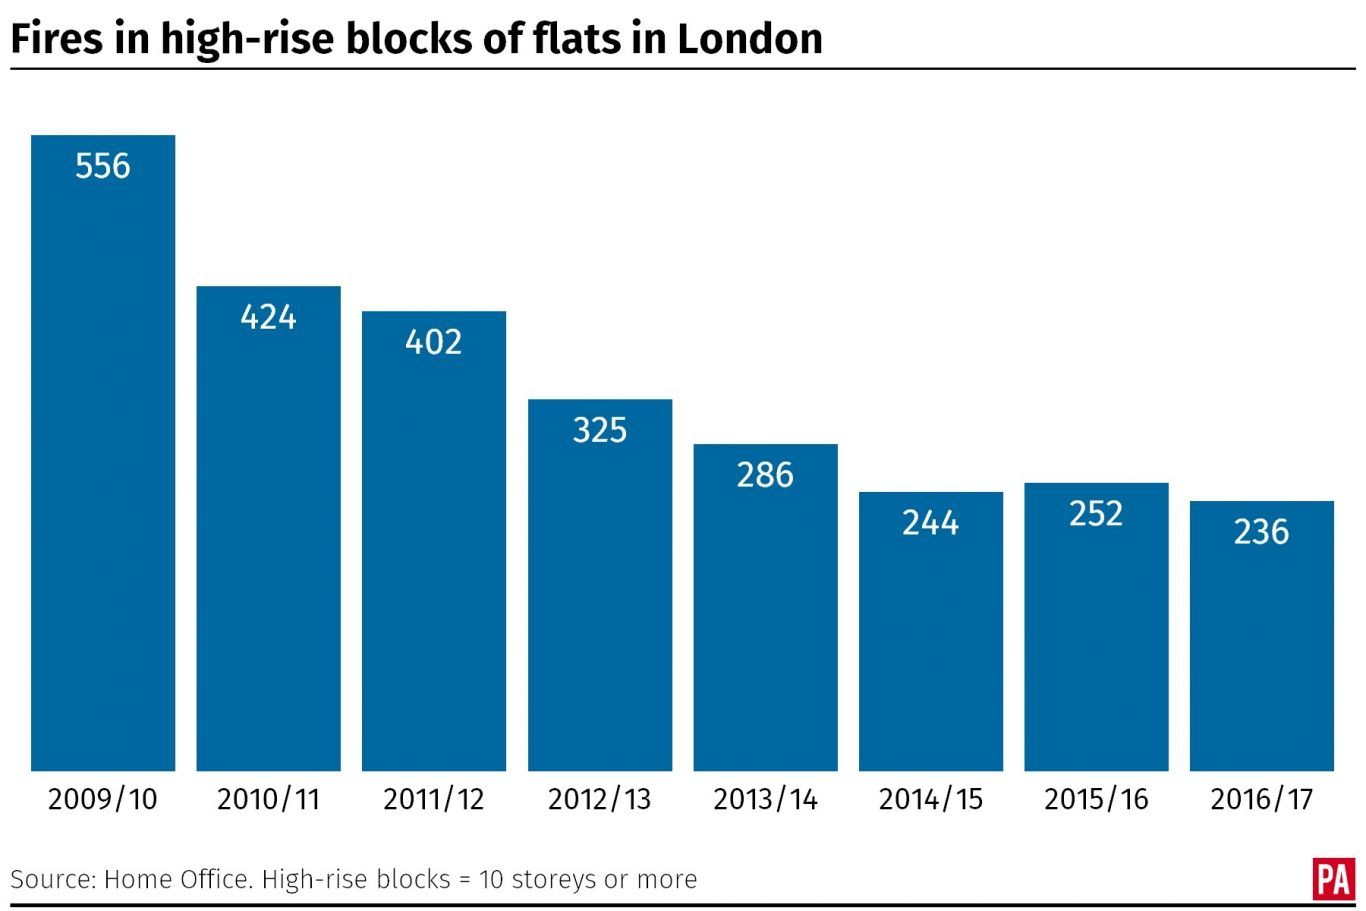 The number of fires in high-rise blocks of flats in London from 2009/10 to 2016/17 graphic